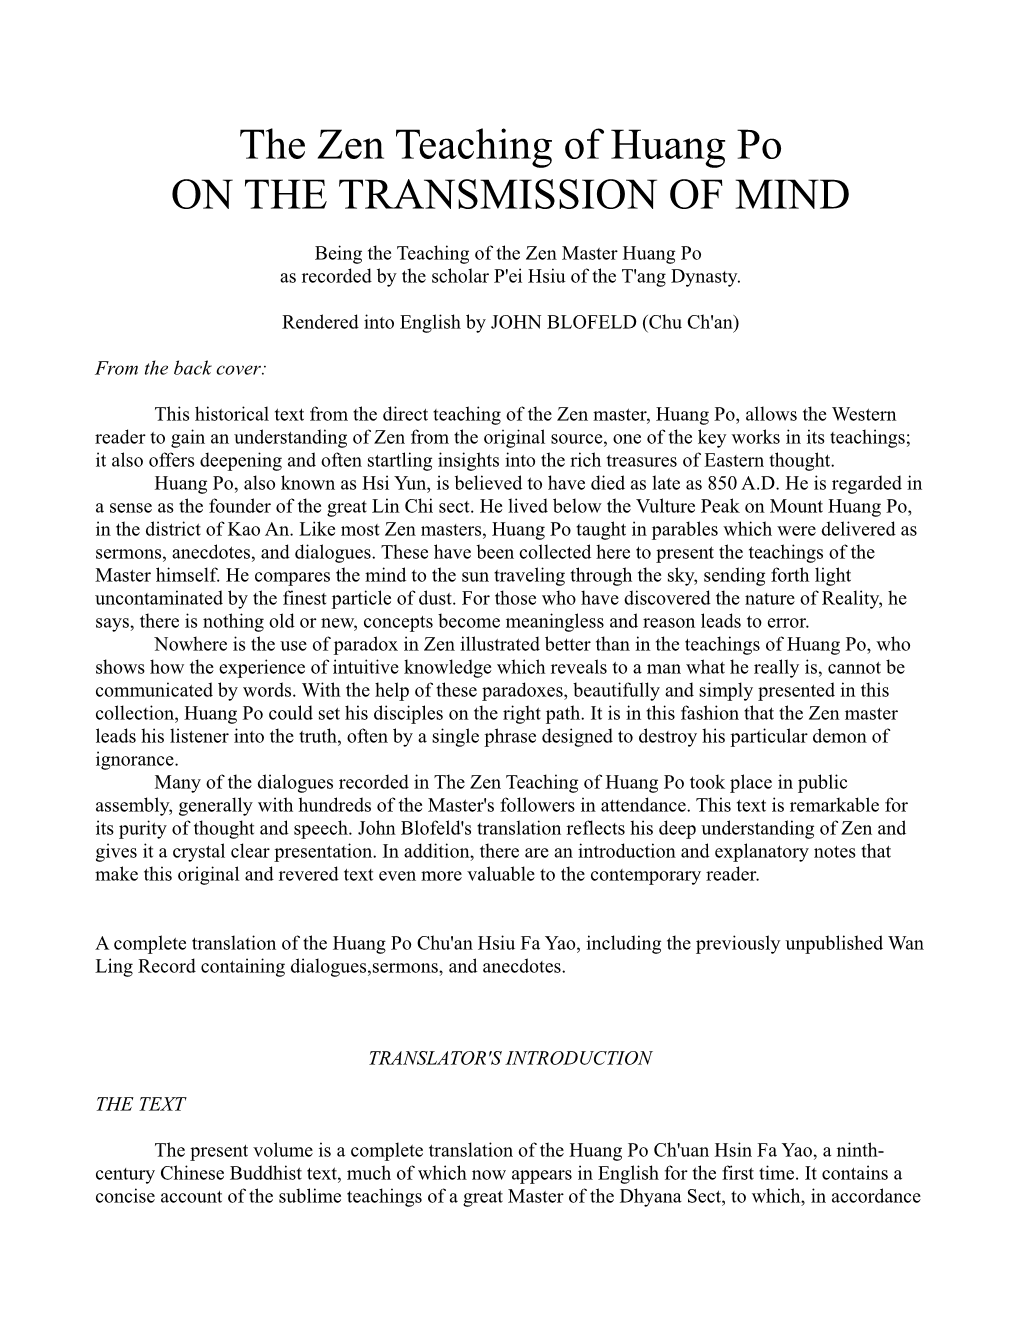 The Zen Teaching of Huang Po on the TRANSMISSION of MIND